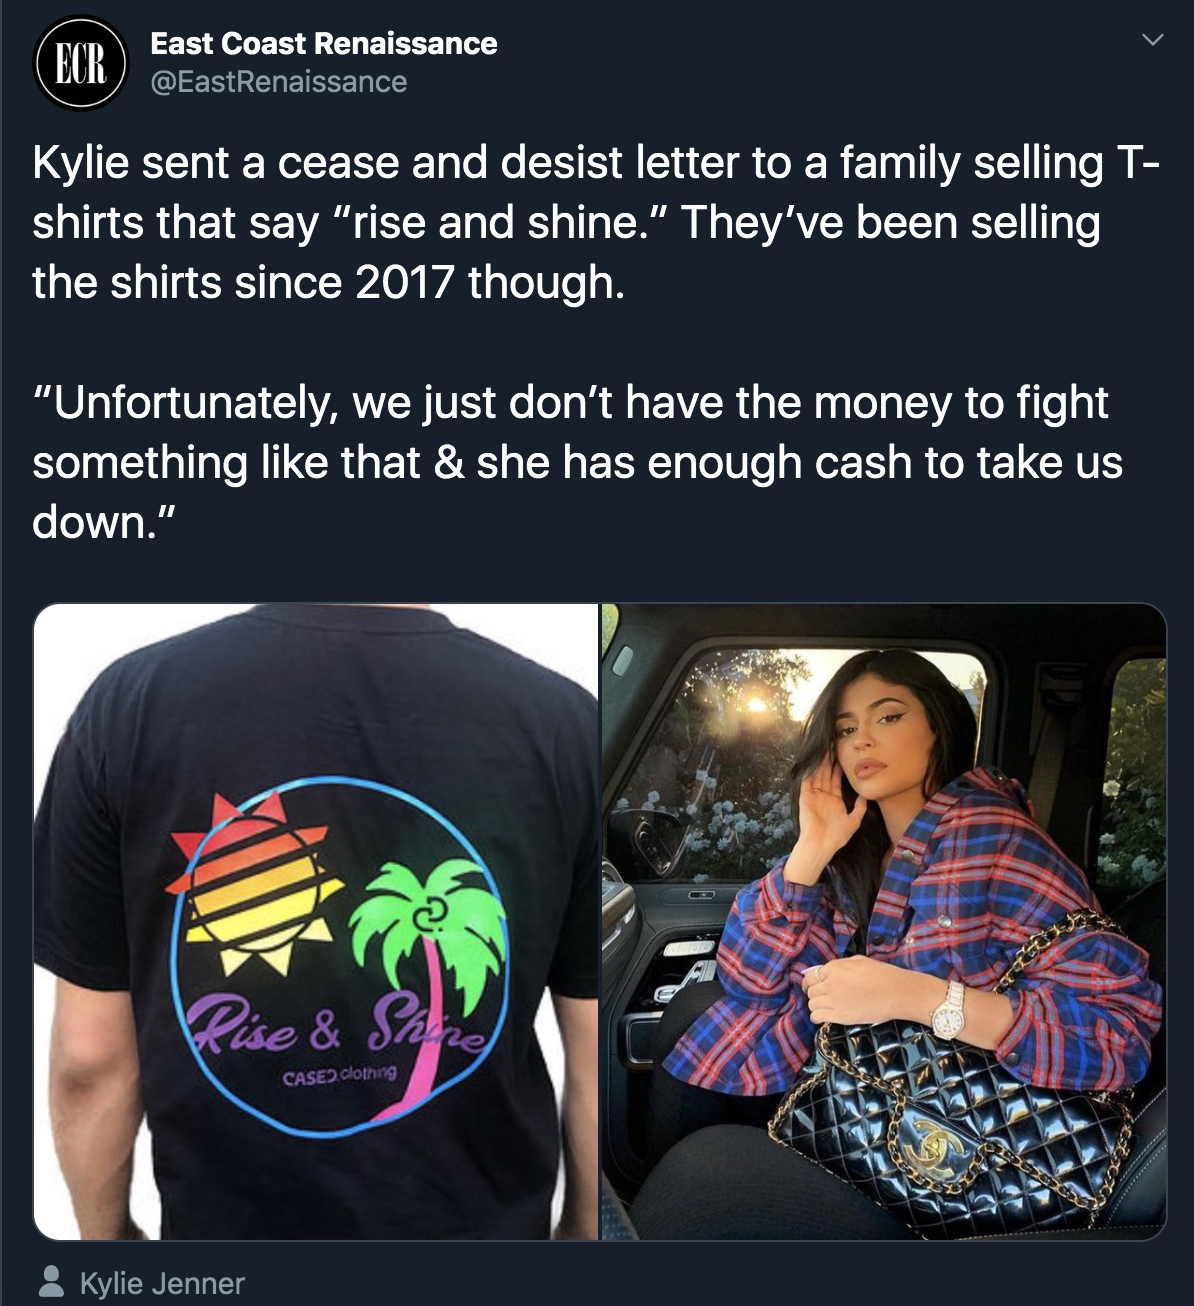 t shirt - East Coast Renaissance Kylie sent a cease and desist letter to a family selling T shirts that say "rise and shine." They've been selling the shirts since 2017 though. "Unfortunately, we just don't have the money to fight something that & she has